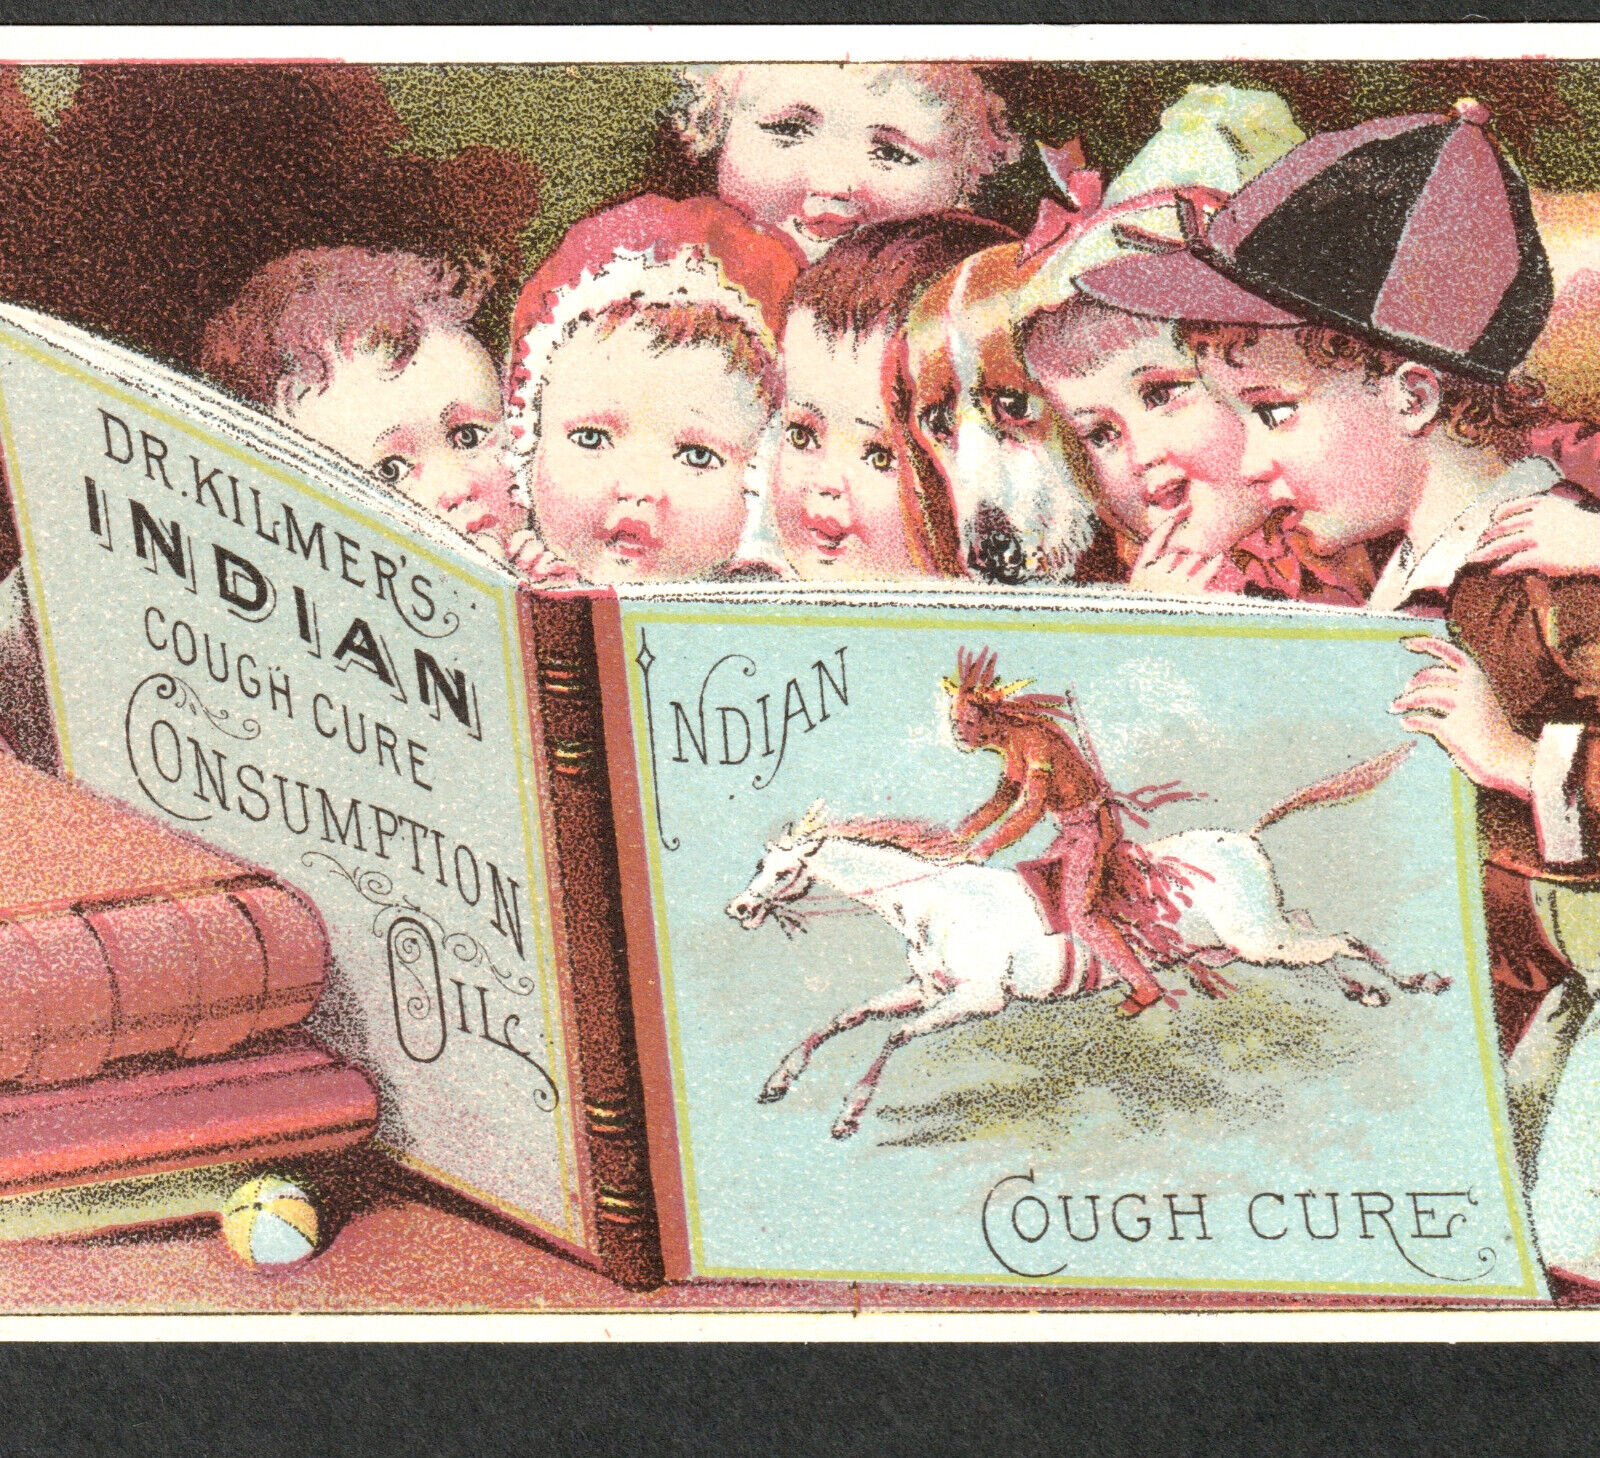 Dr Kilmers Indian Oil Cough Cure DEATH & Consumption Remedy Victorian Trade Card